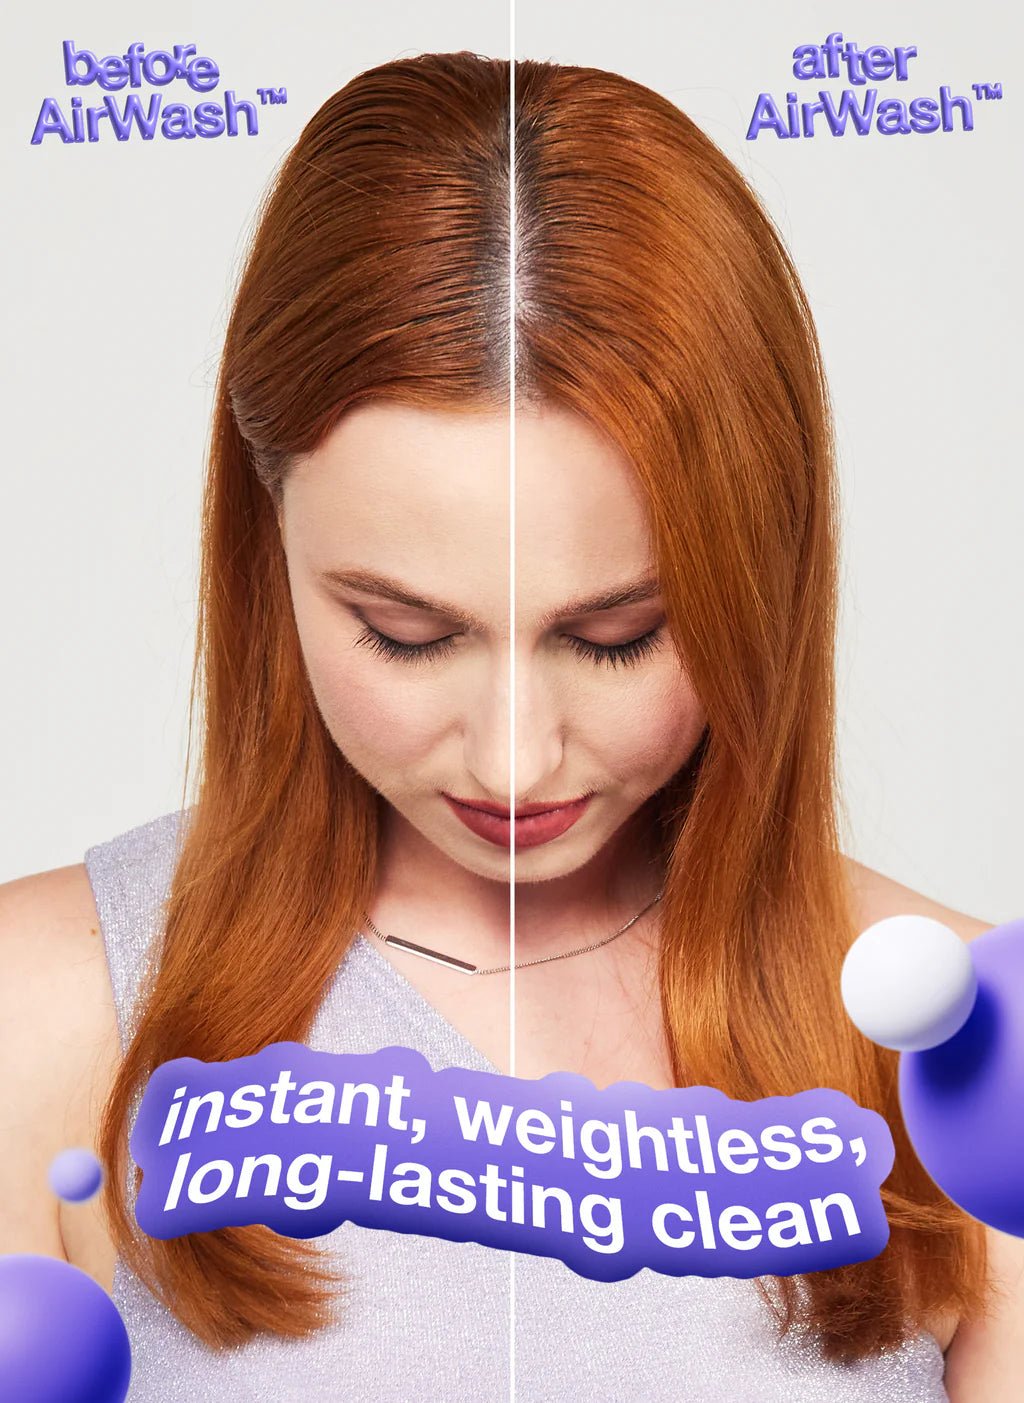 Split image showing a woman with red hair: the left side labeled "before K18 AirWash Dry Shampoo from Simply Colour Hair Salon Studio & Online Store" has slightly less vibrant hair, and the right side labeled "after K18 AirWash Dry Shampoo from Simply Colour Hair Salon Studio & Online Store" has shinier, smoother hair. Text: "instant, weightless, long-lasting clean with dry shampoo that reduces oil.